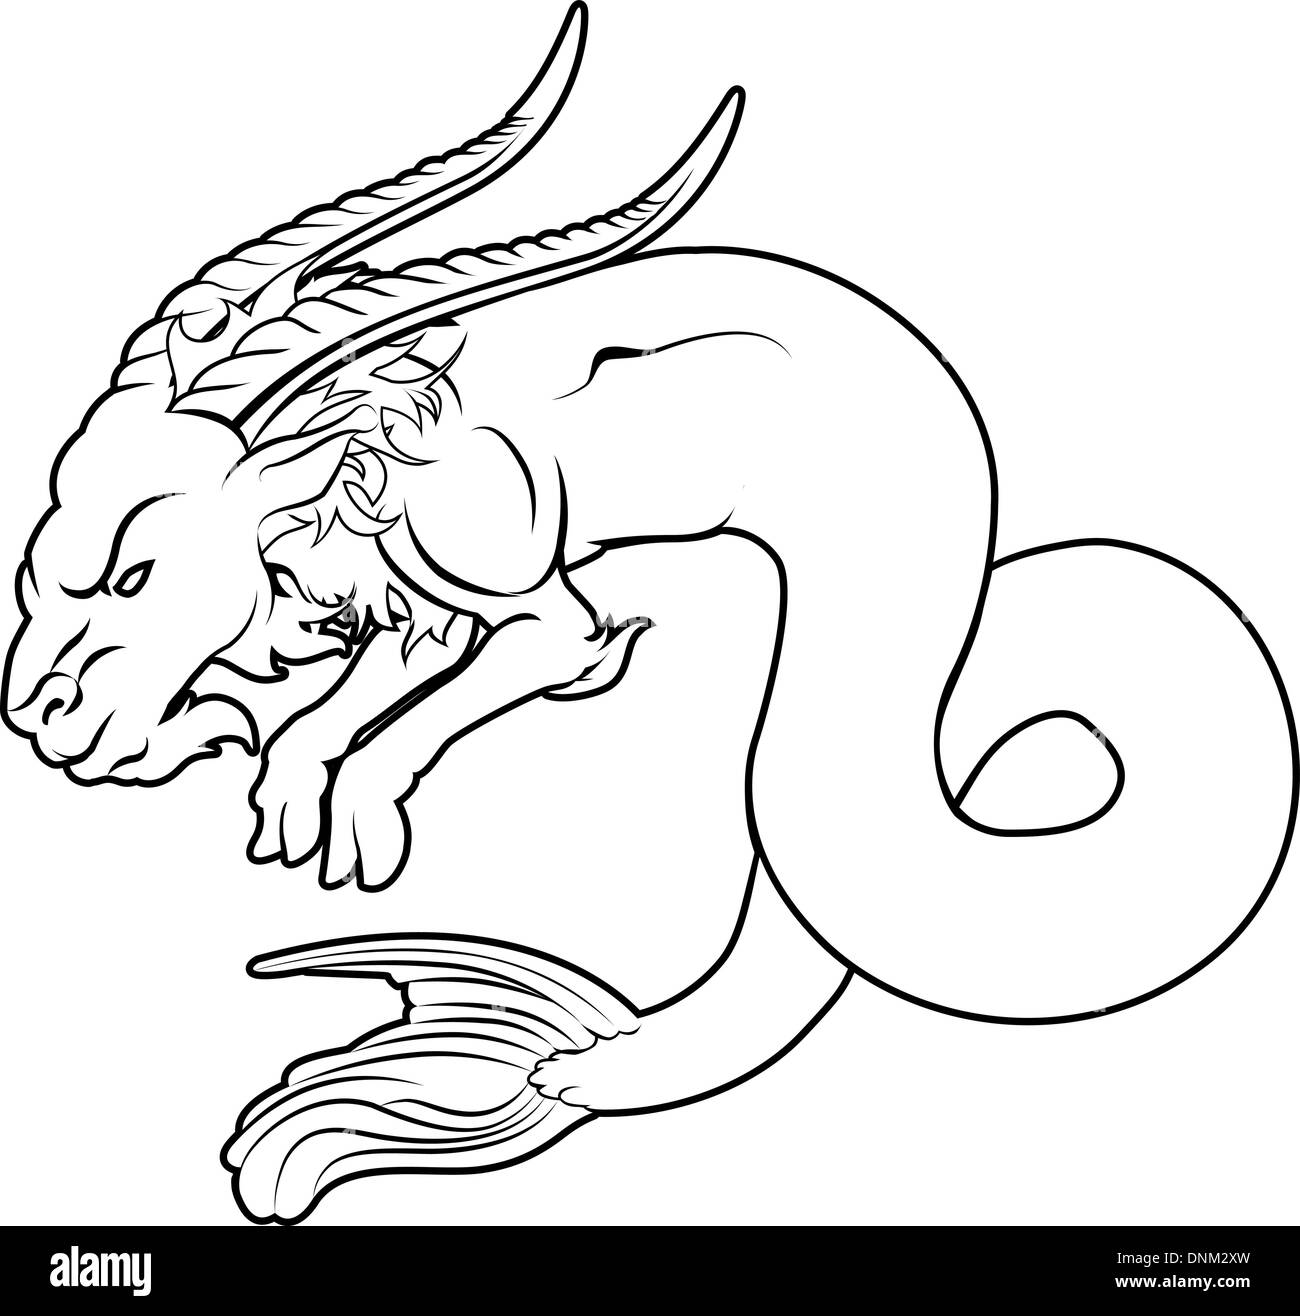 An illustration of a stylised black sea goat perhaps a sea goat tattoo Stock Vector